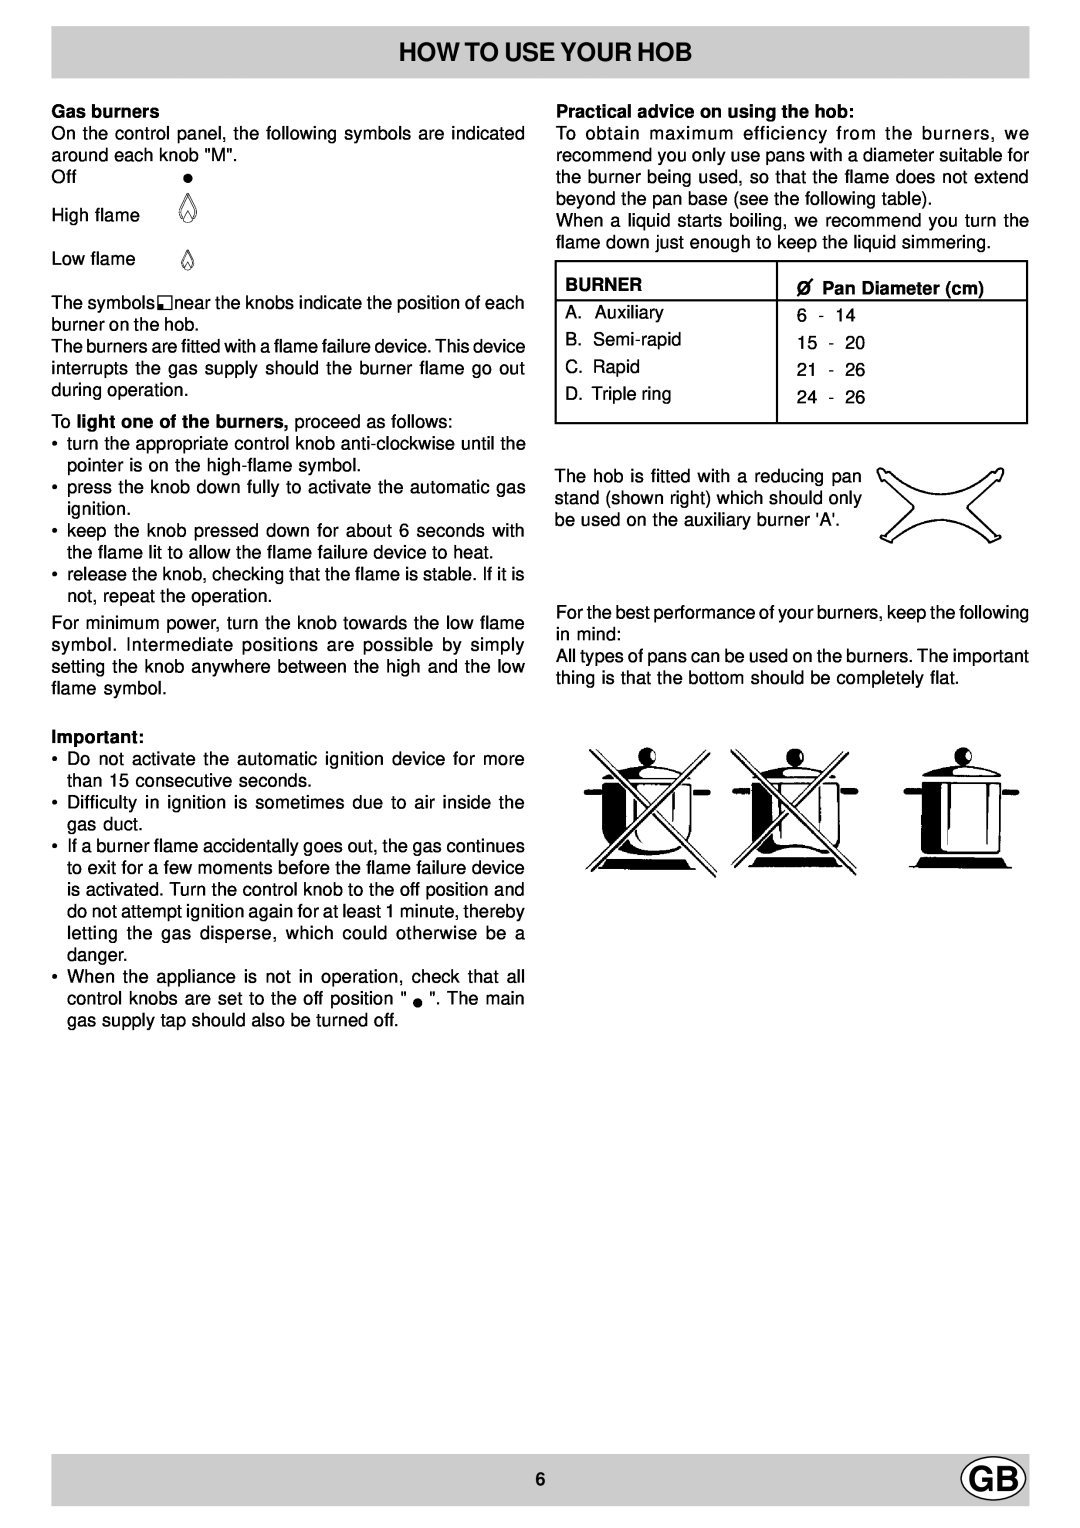 Hotpoint EG900X manual How To Use Your Hob, Gas burners, To light one of the burners, proceed as follows, Burner 